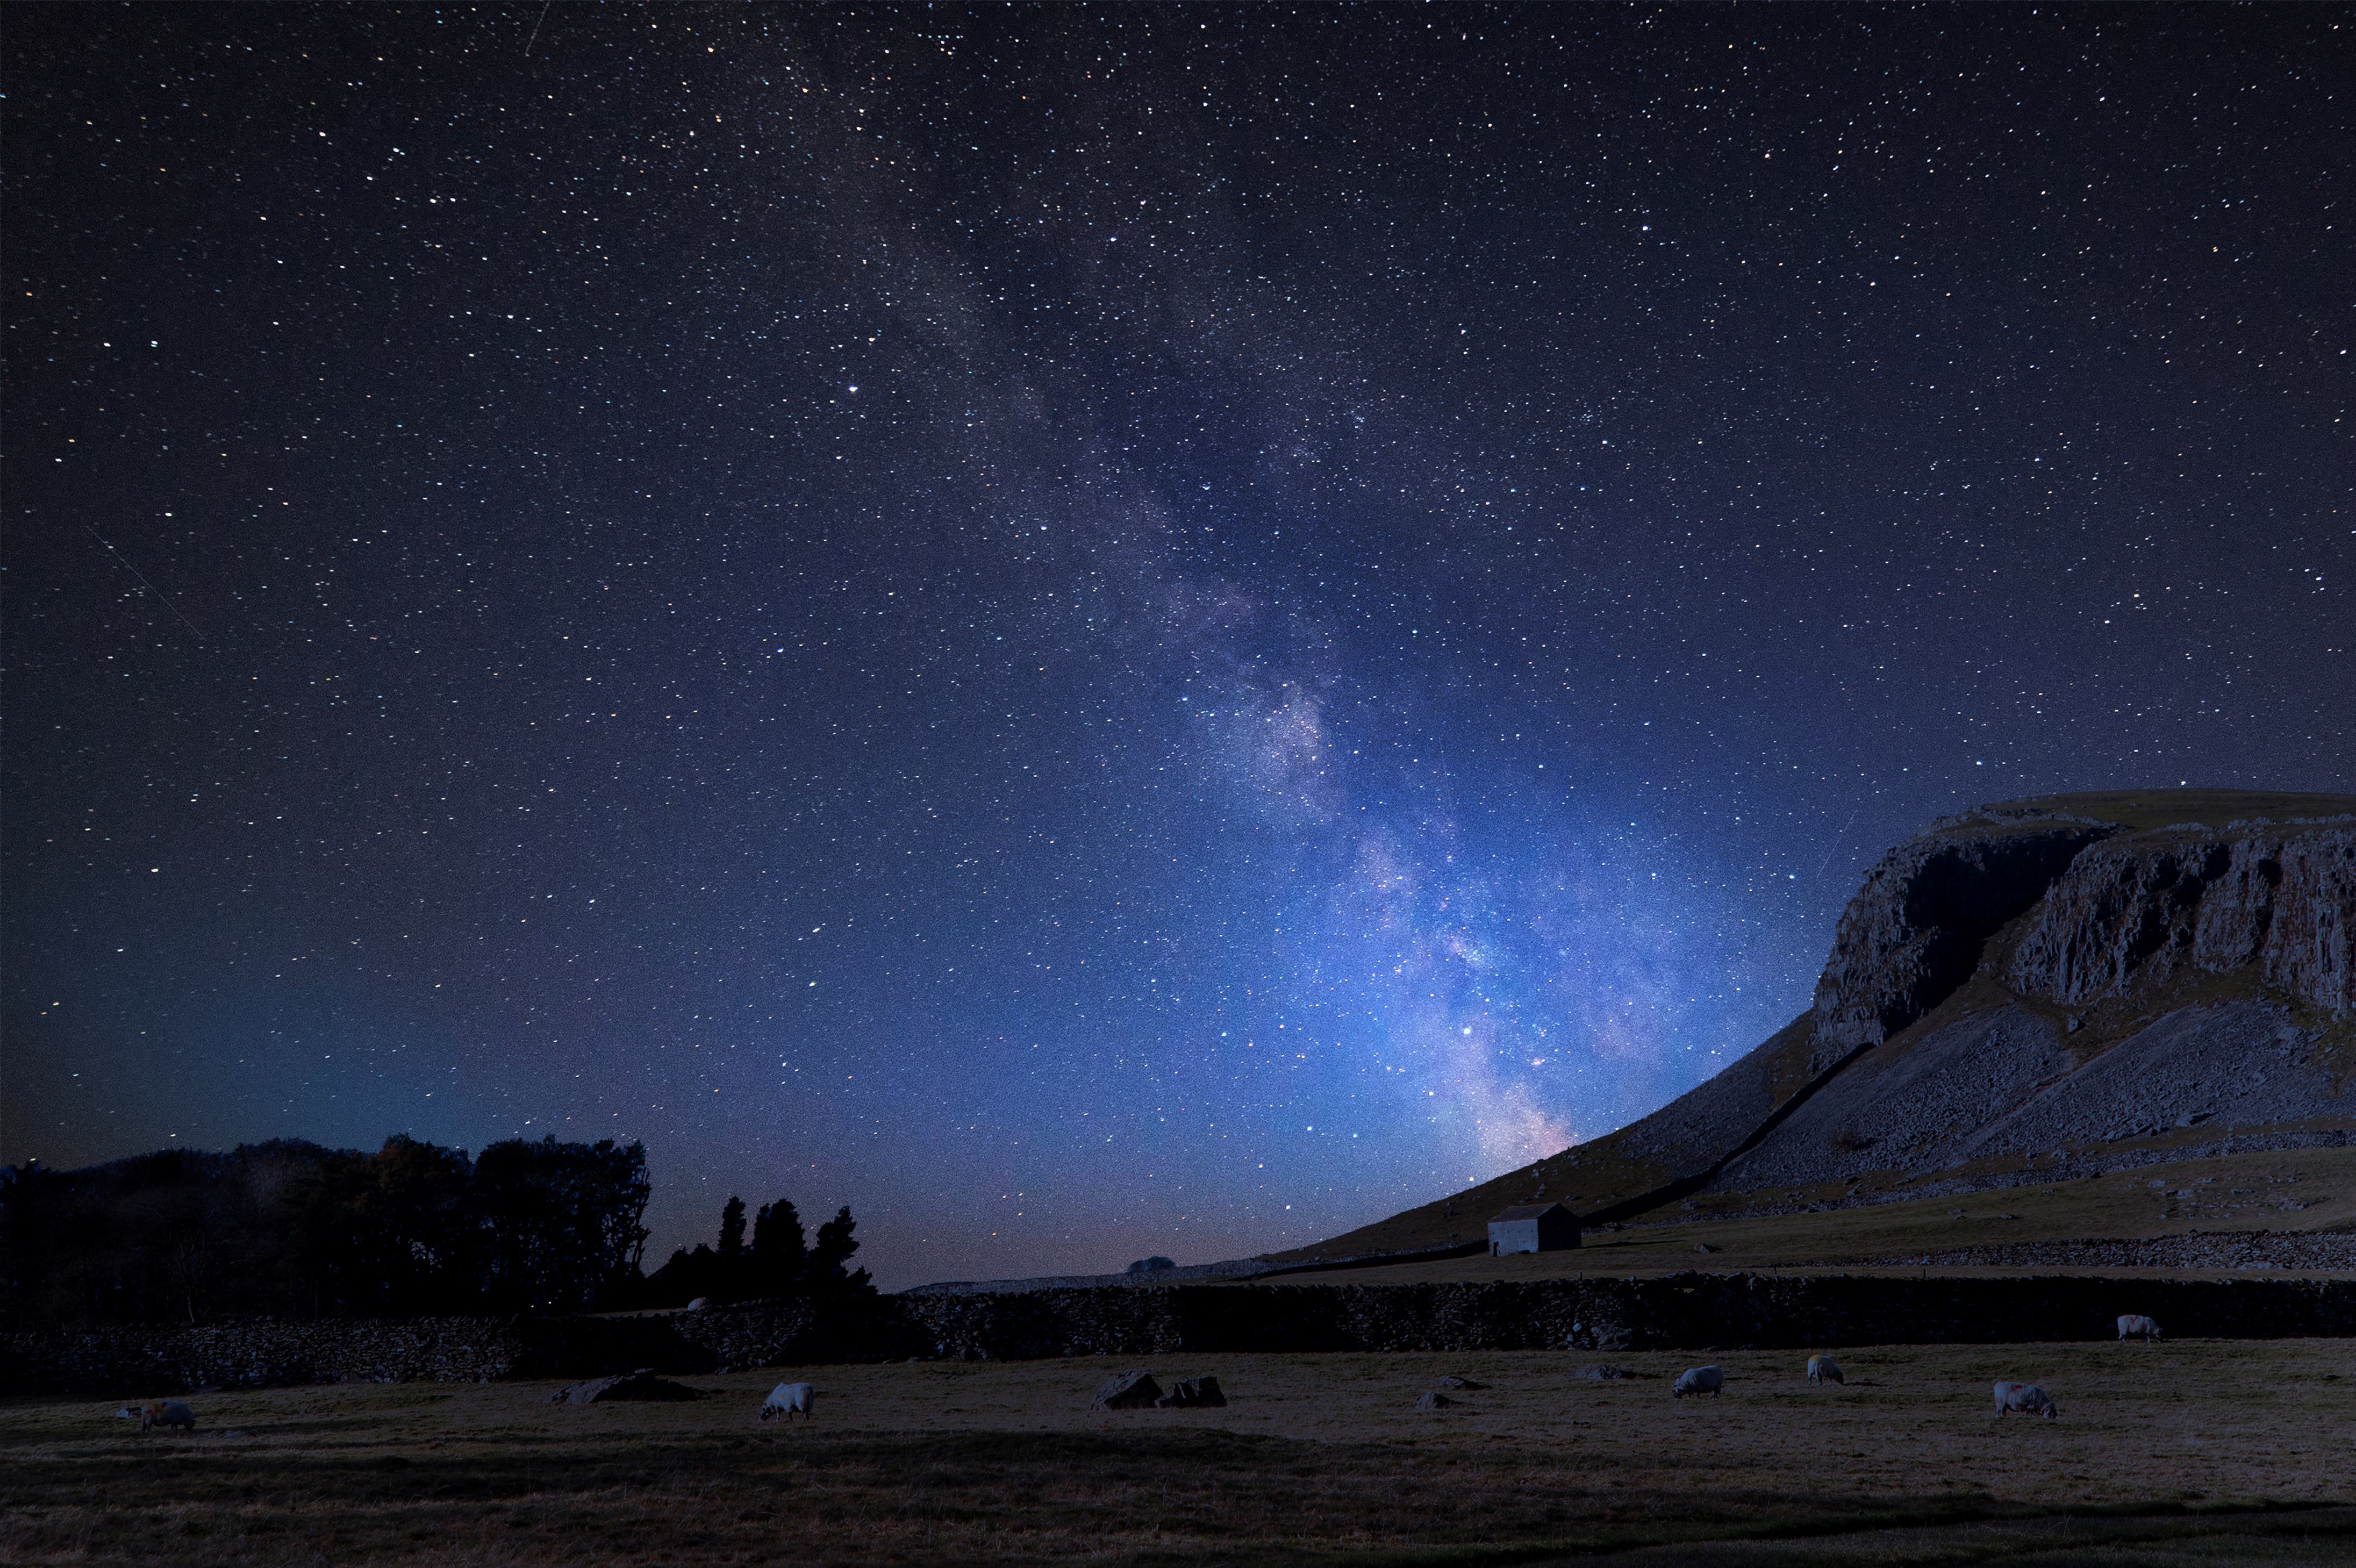 A milky way over Norber Ridge in the Yorkshire Dales.